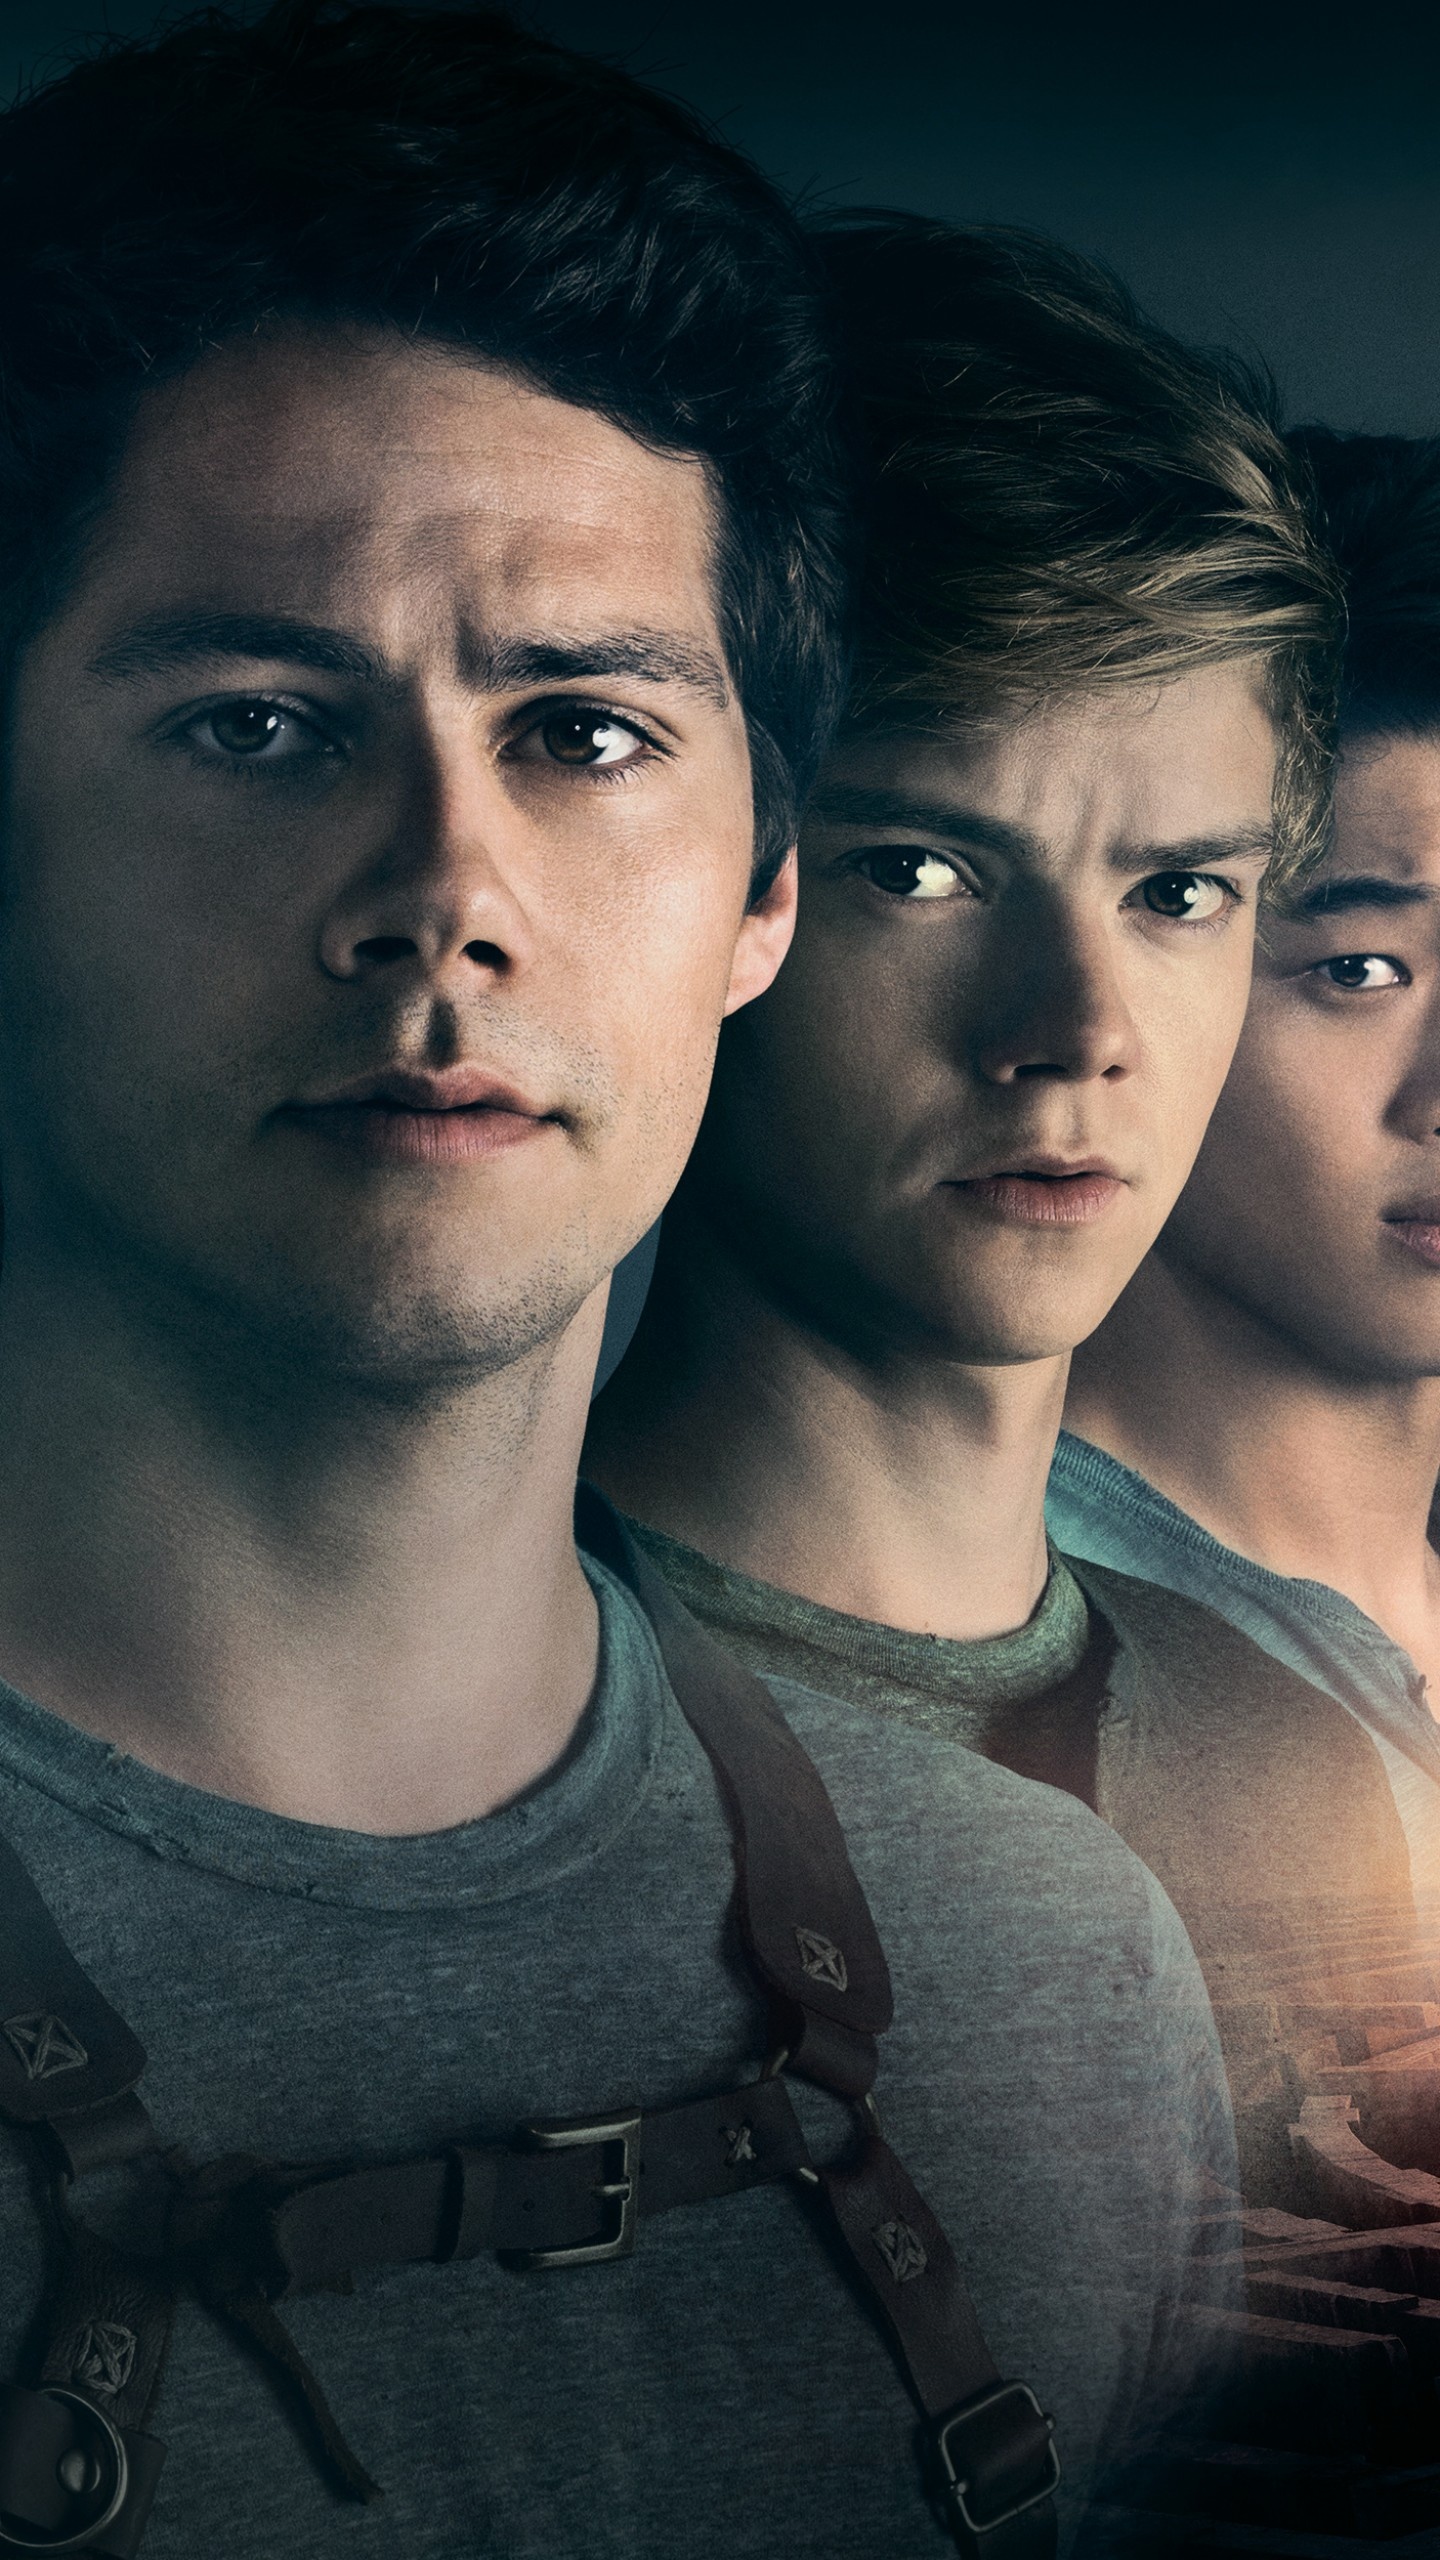 Dylan O'Brien Movies, Maze Runner series, On-screen chemistry, Action-packed films, 1440x2560 HD Handy